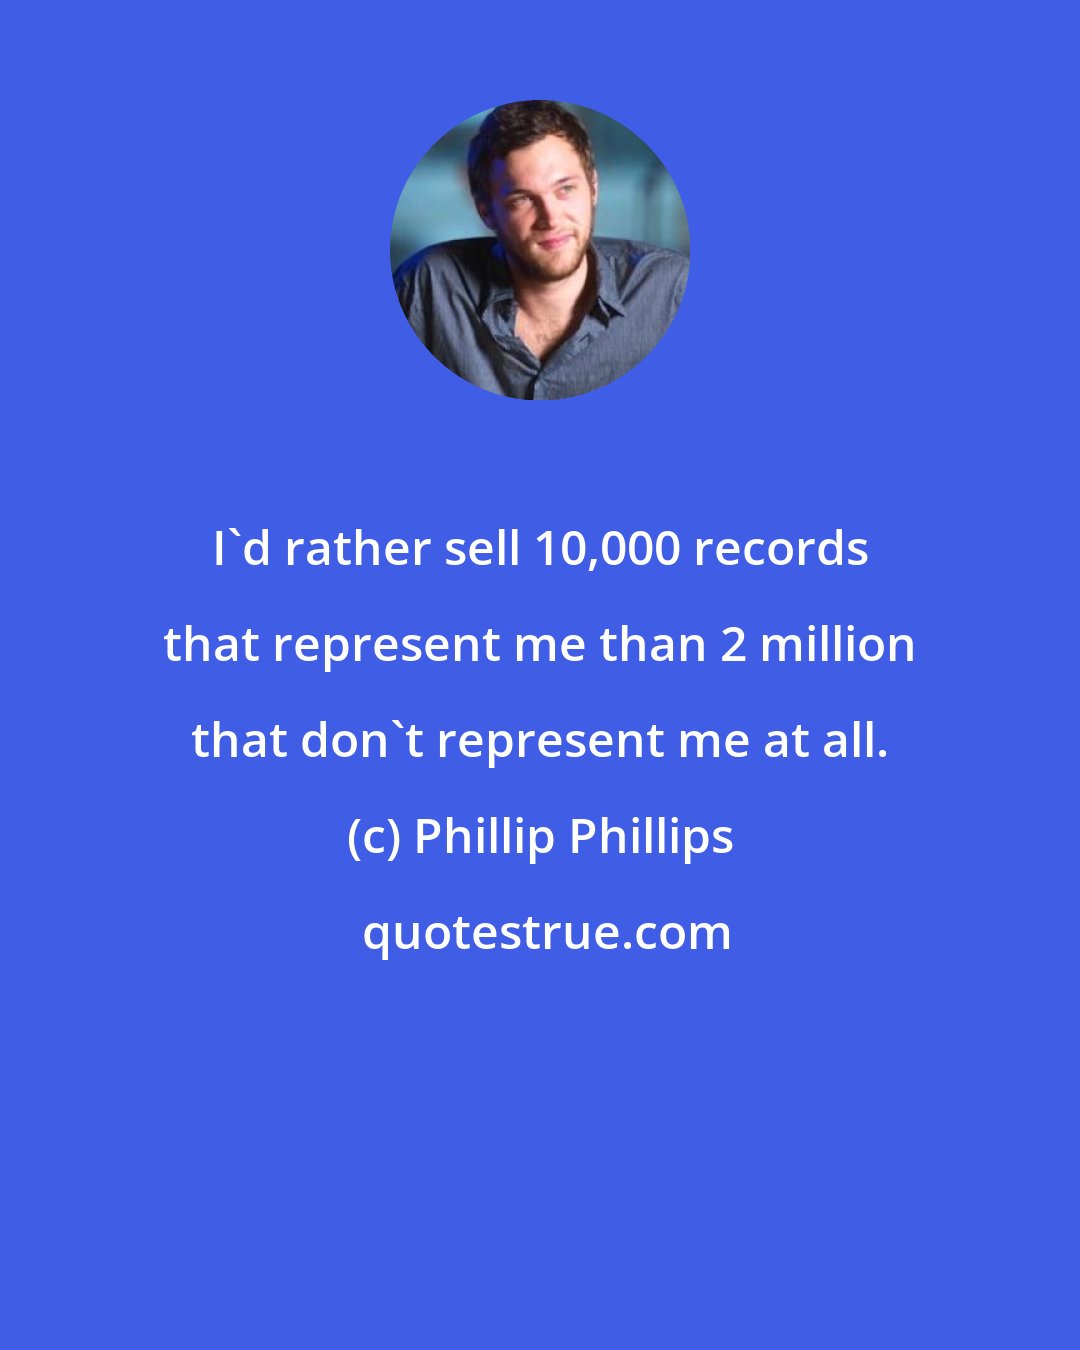 Phillip Phillips: I'd rather sell 10,000 records that represent me than 2 million that don't represent me at all.